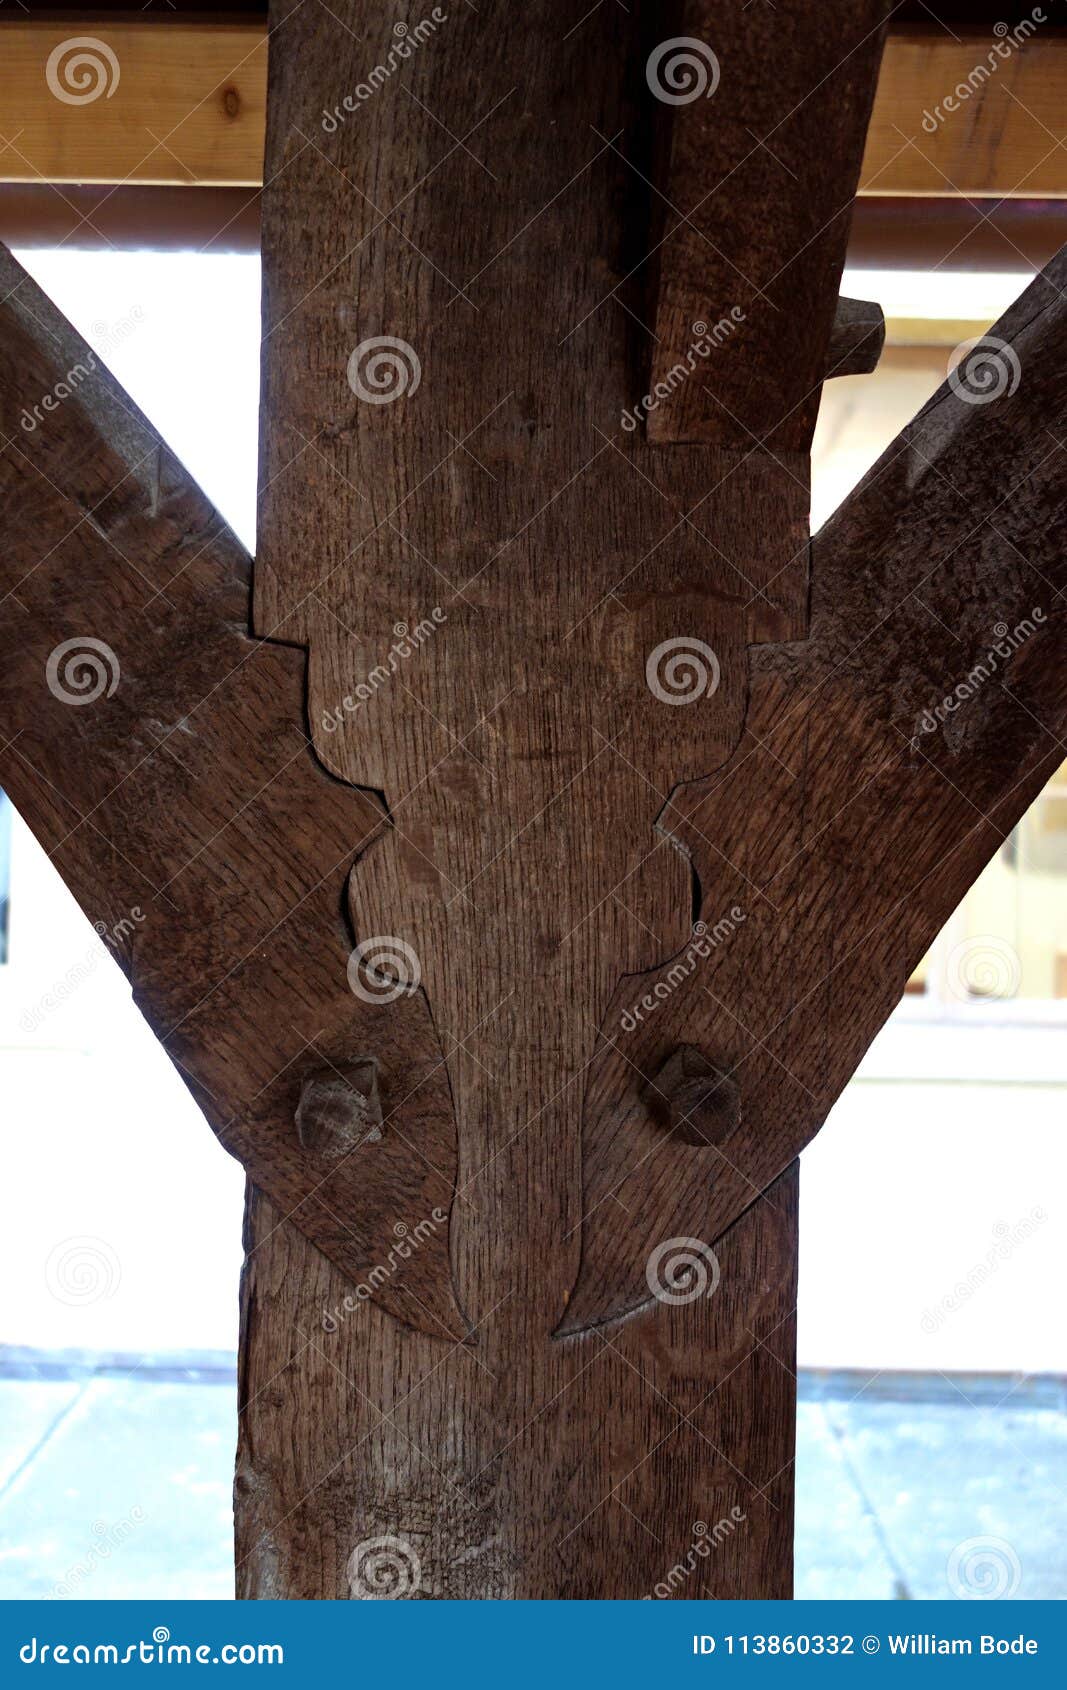 Unique Timber Framing Brace Joint Stock Photo Image Of